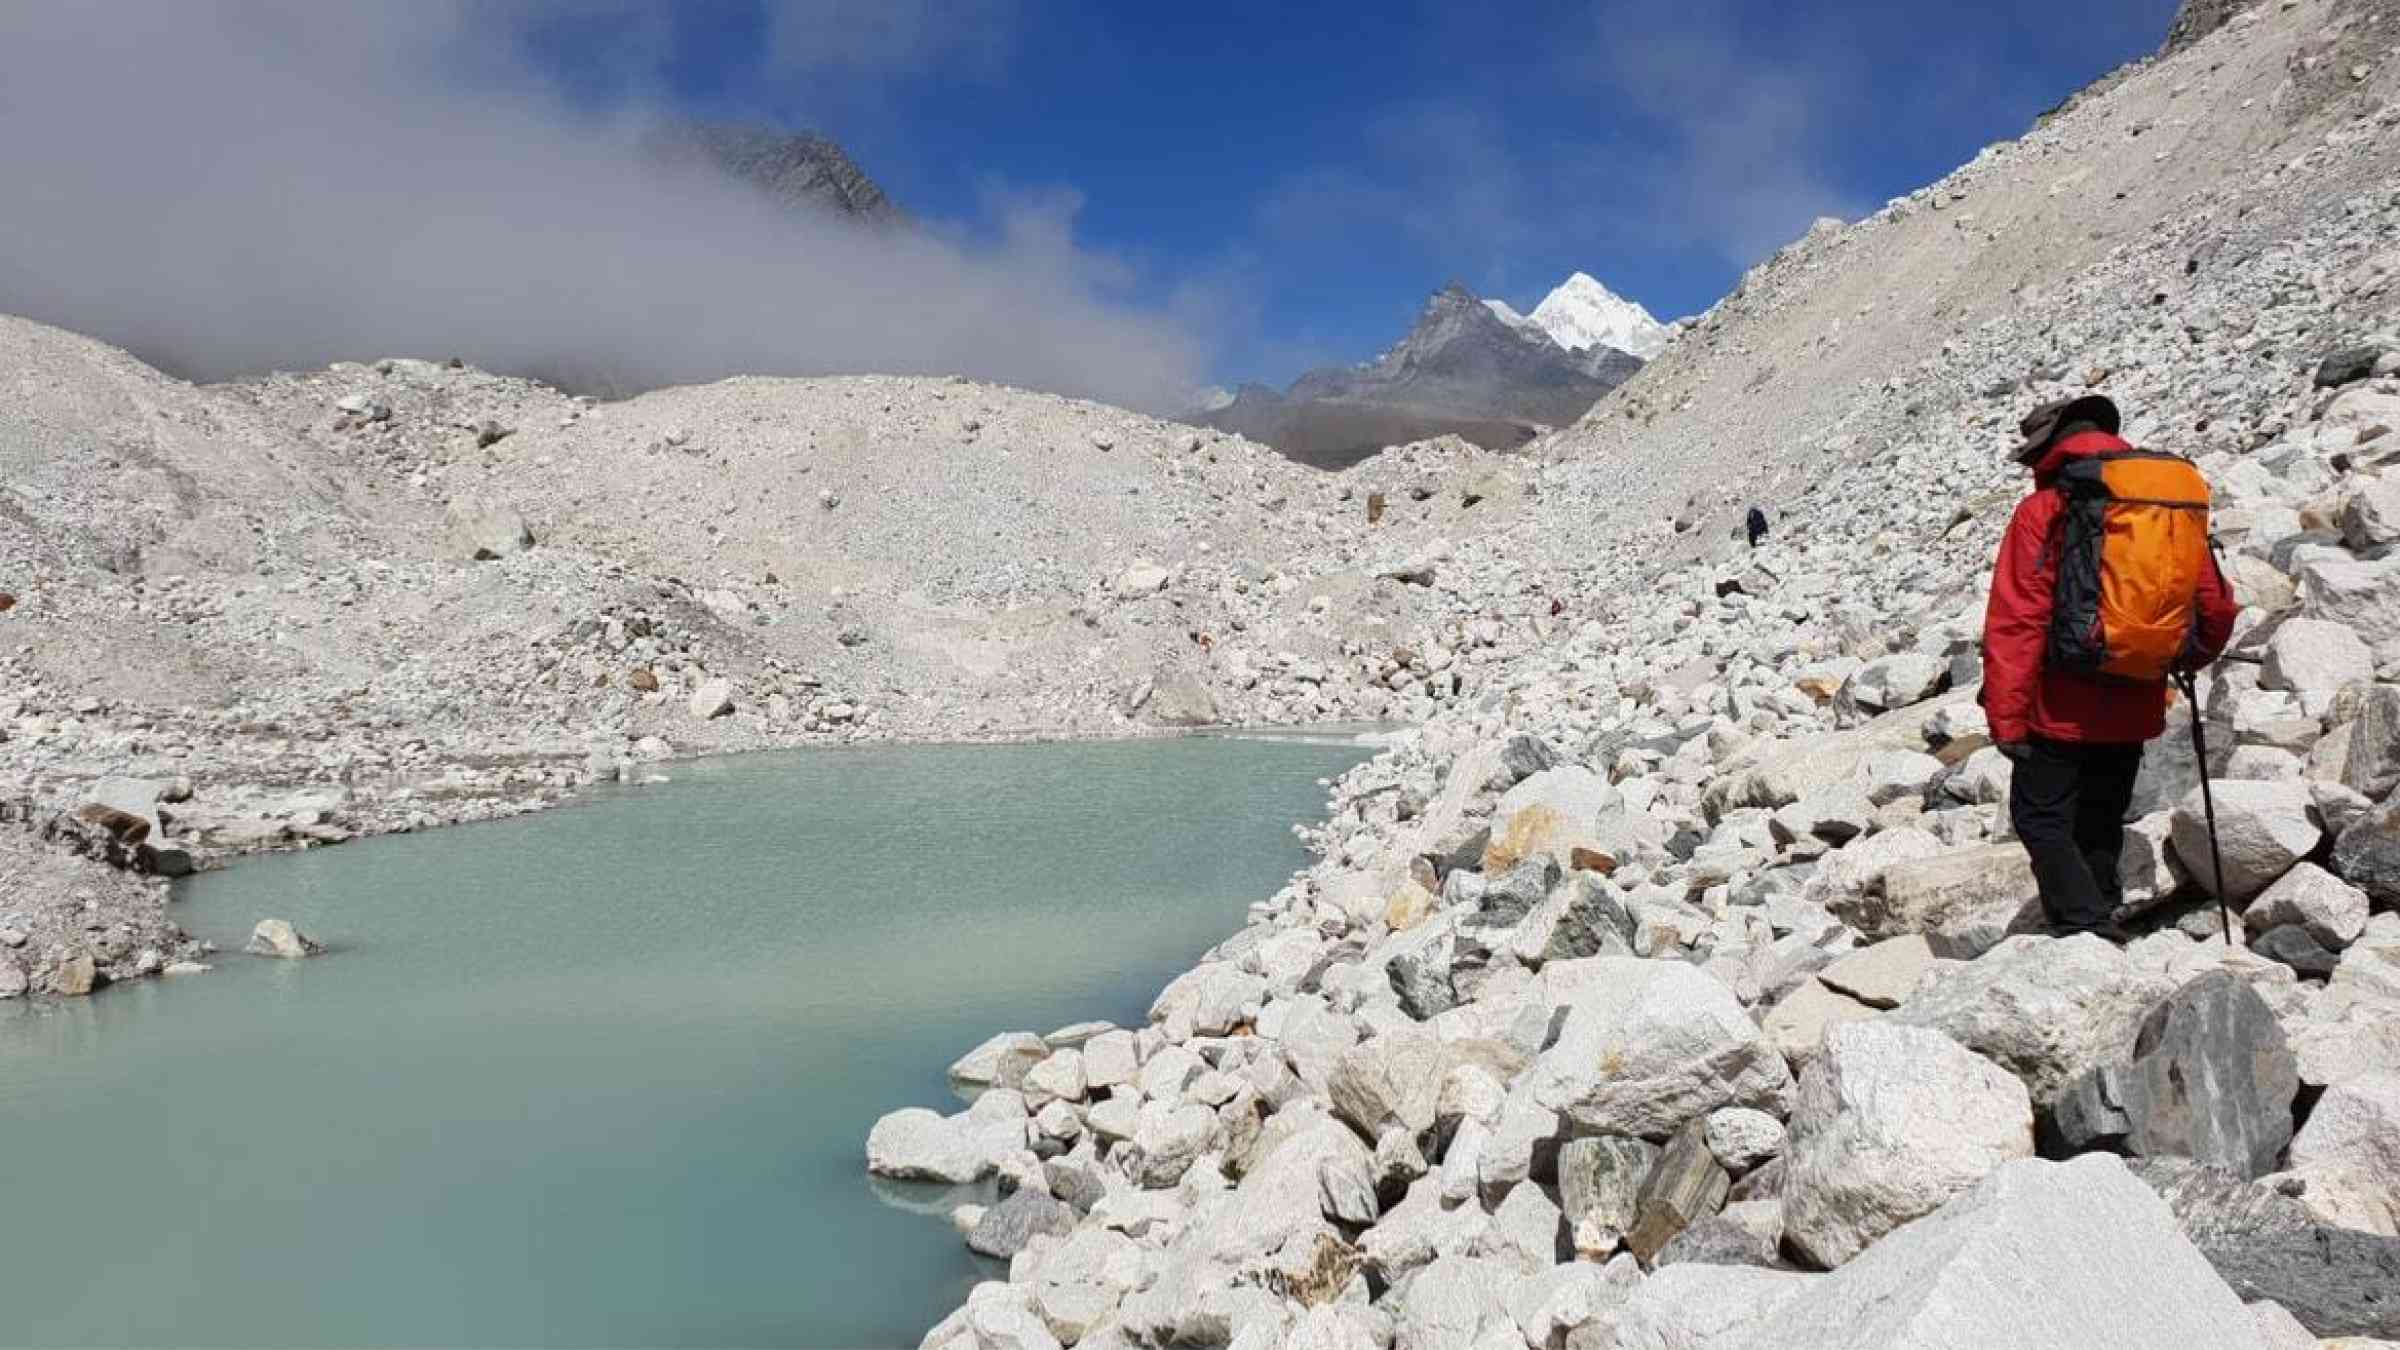 A man treks the banks of a lake high up Nepal near Mt. Everest